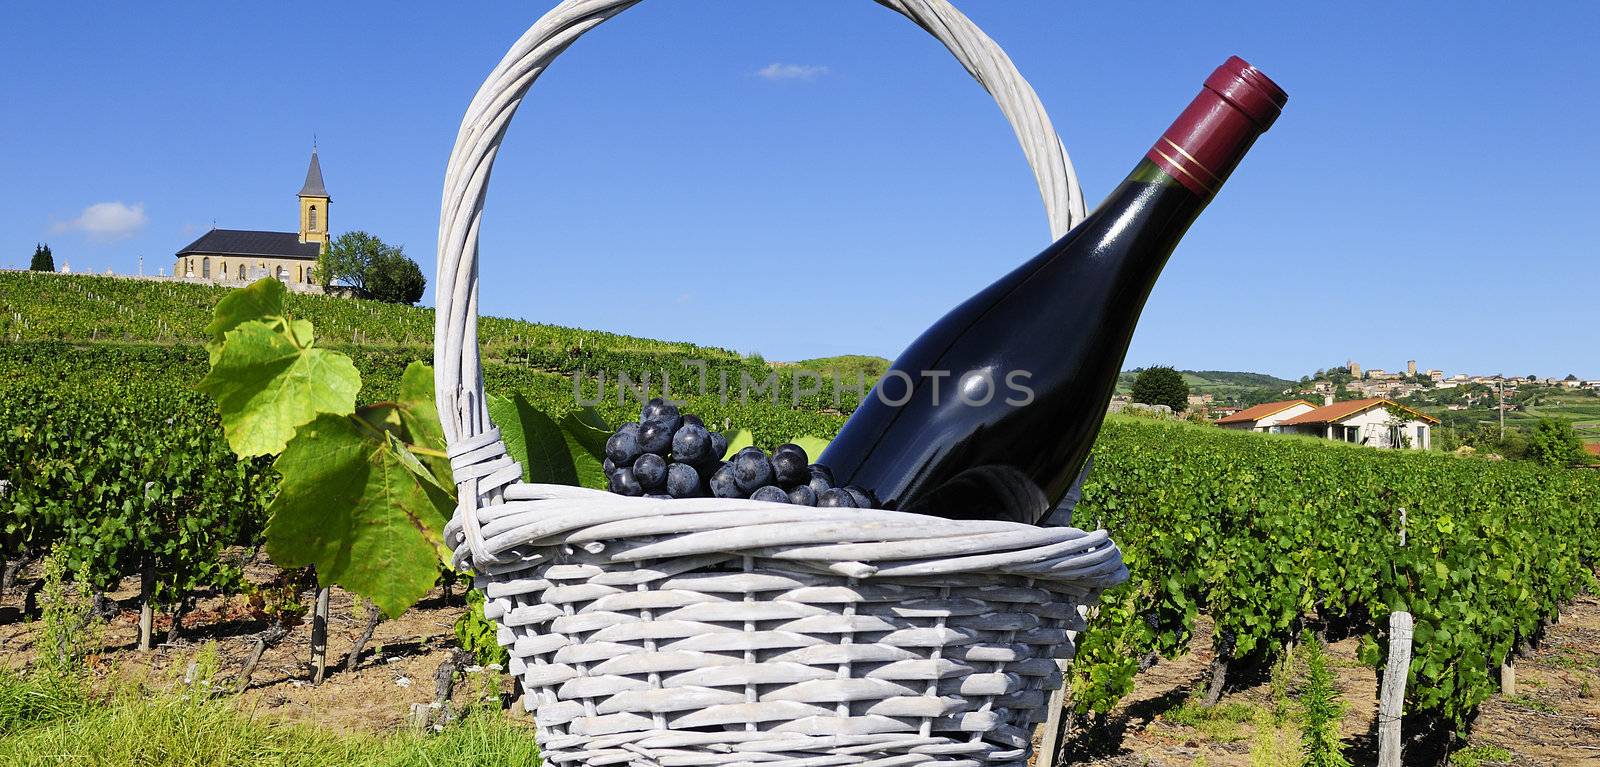 bottle of red wine and grappes in basket in France 